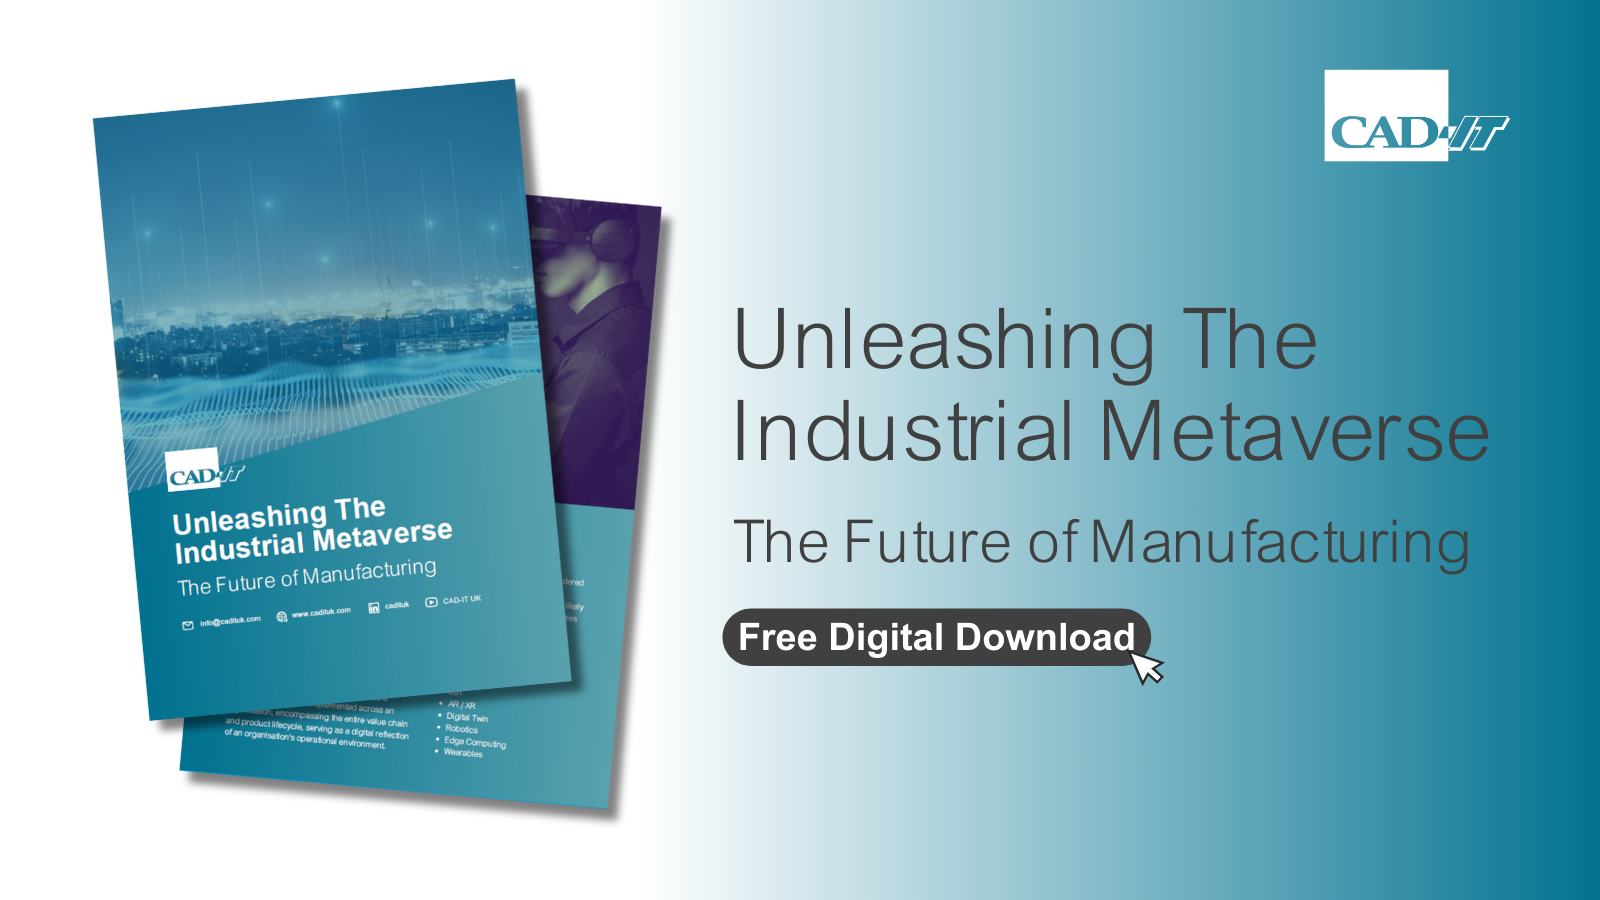 The Industrial Metaverse